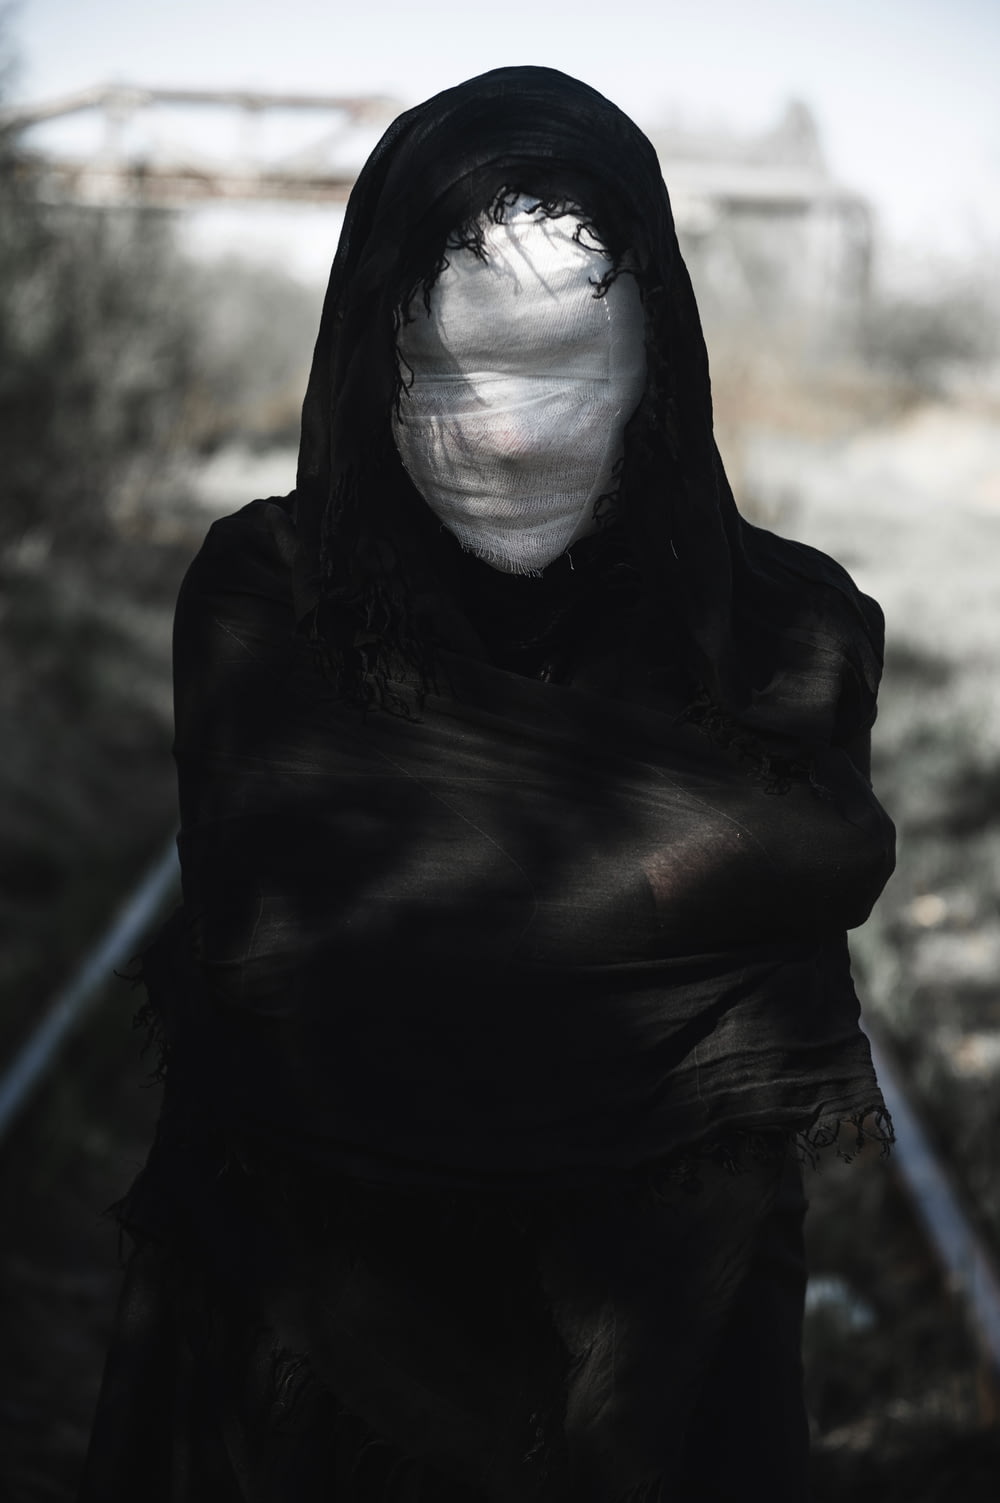 a person wearing a black hooded jacket and a white mask